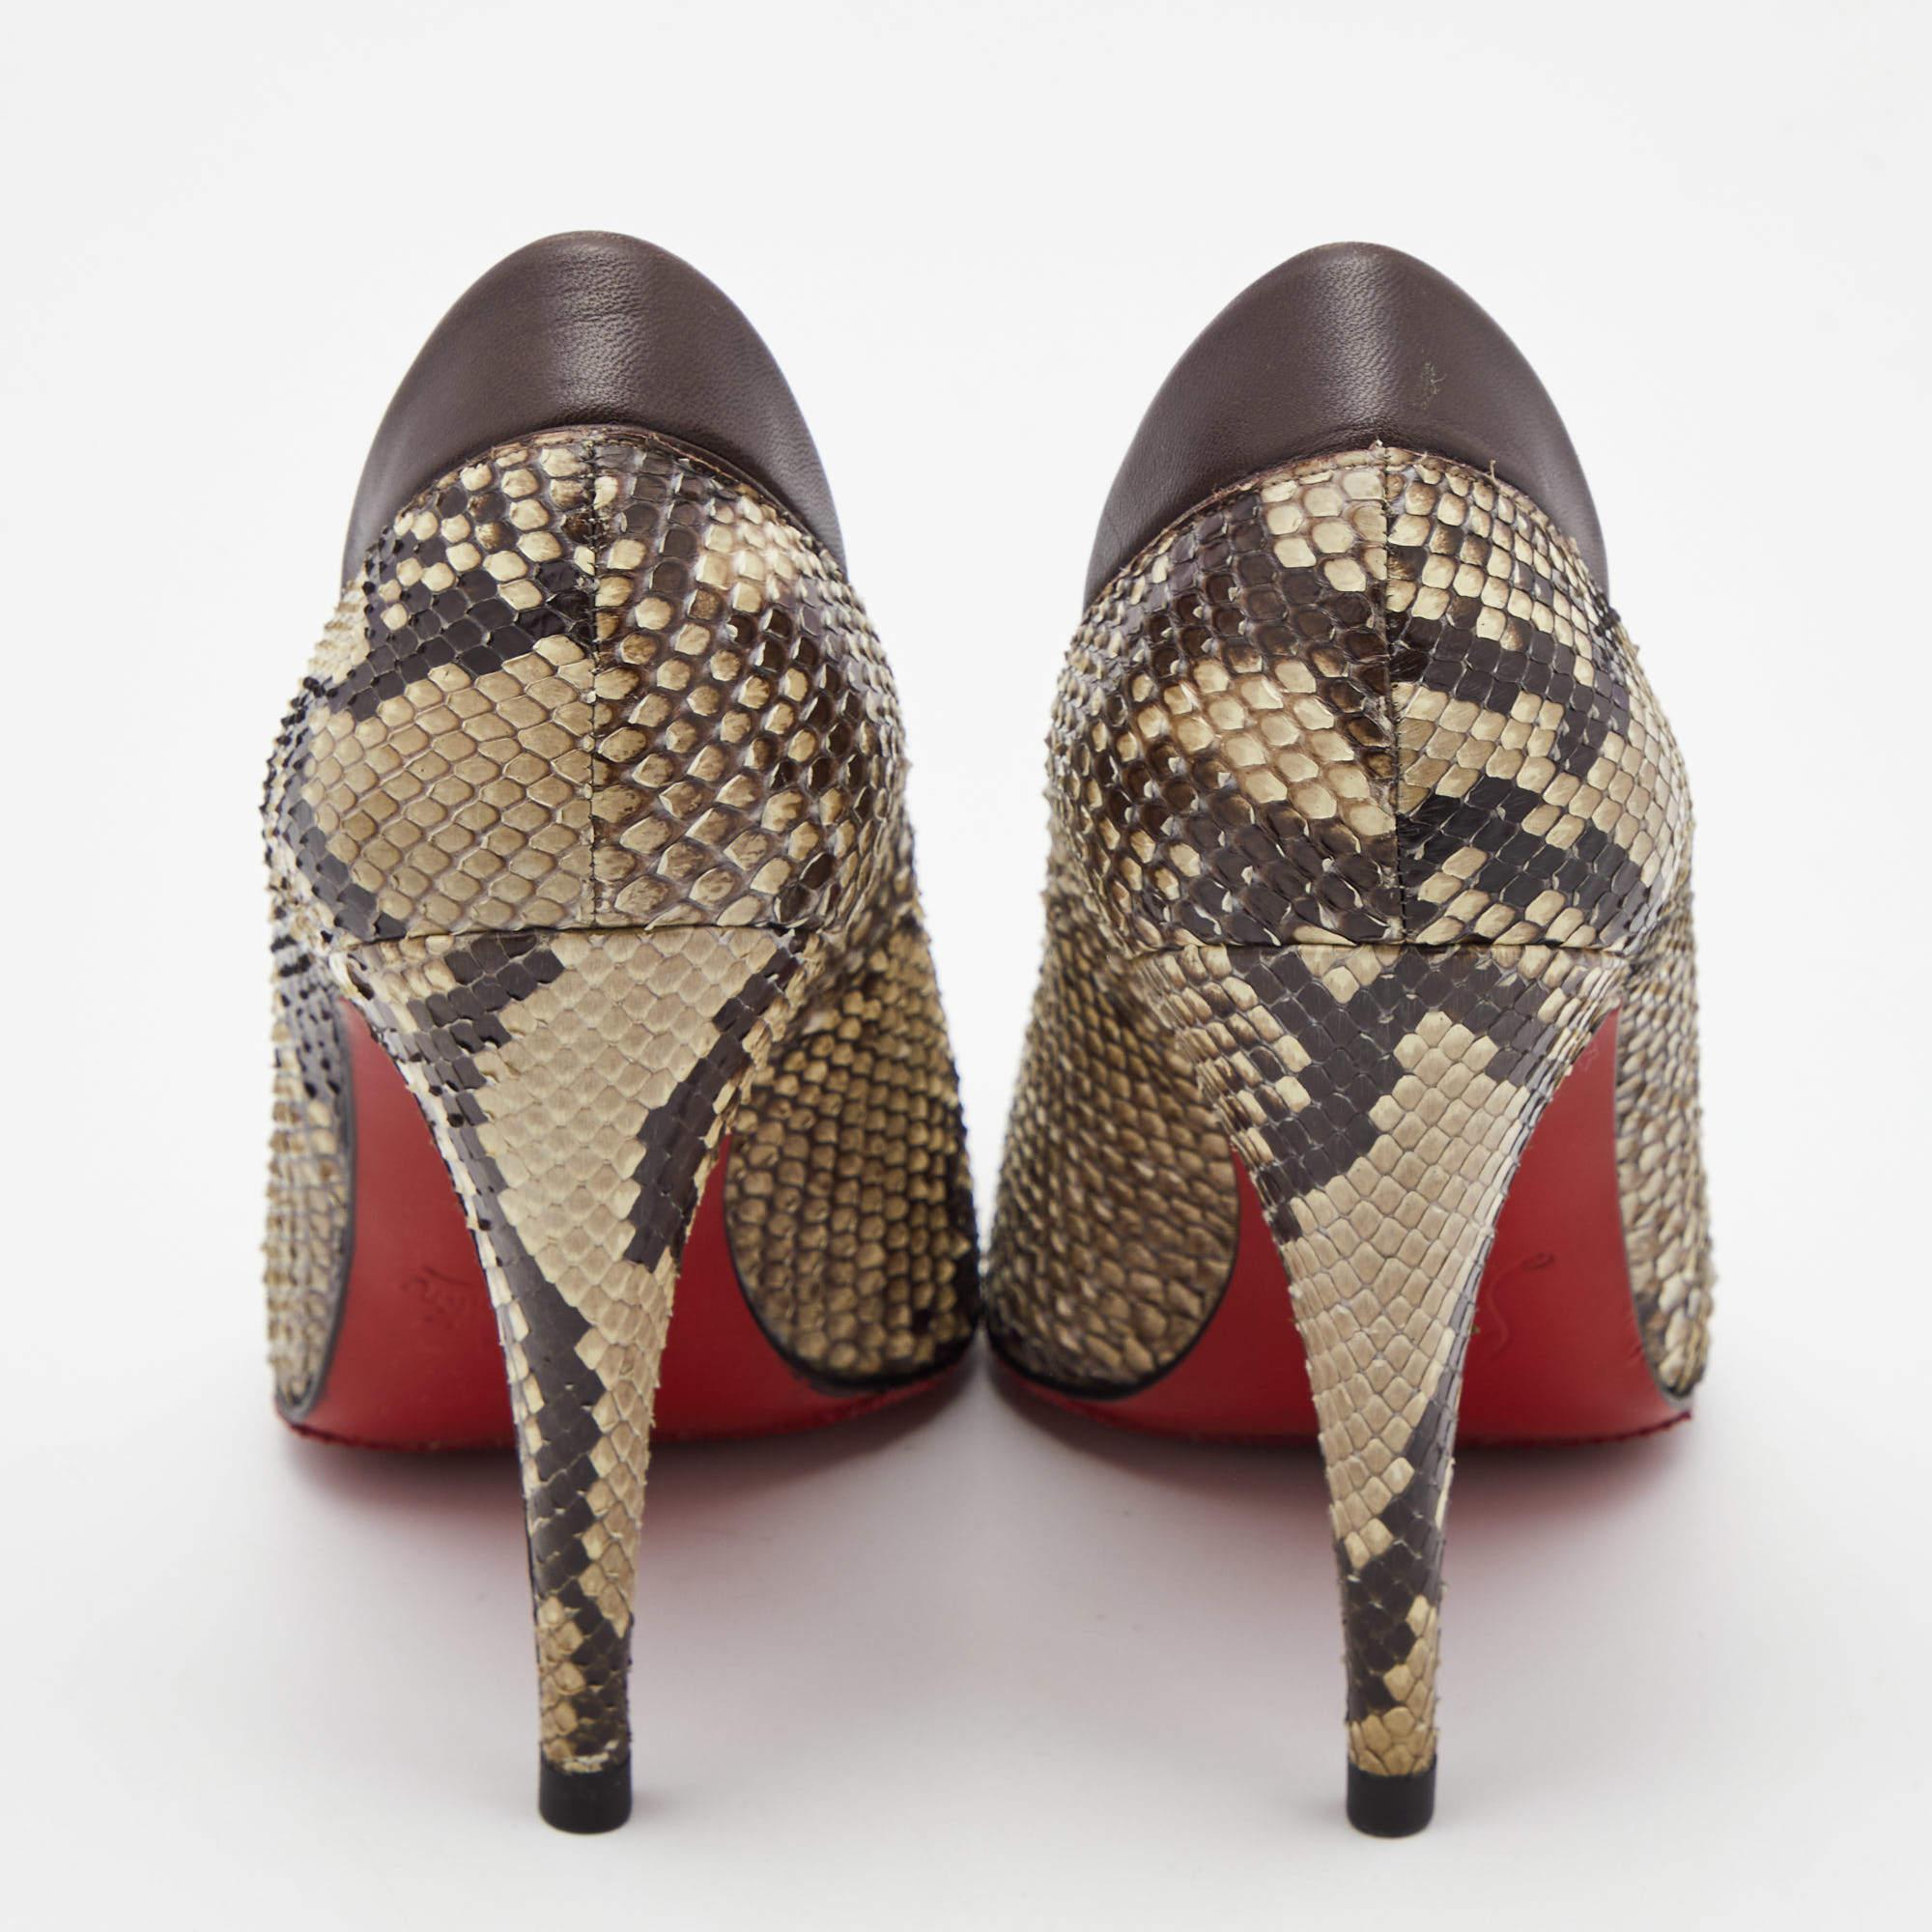 Christian Louboutin Beige/Brown Python Pumps Size 38.5 For Sale 4